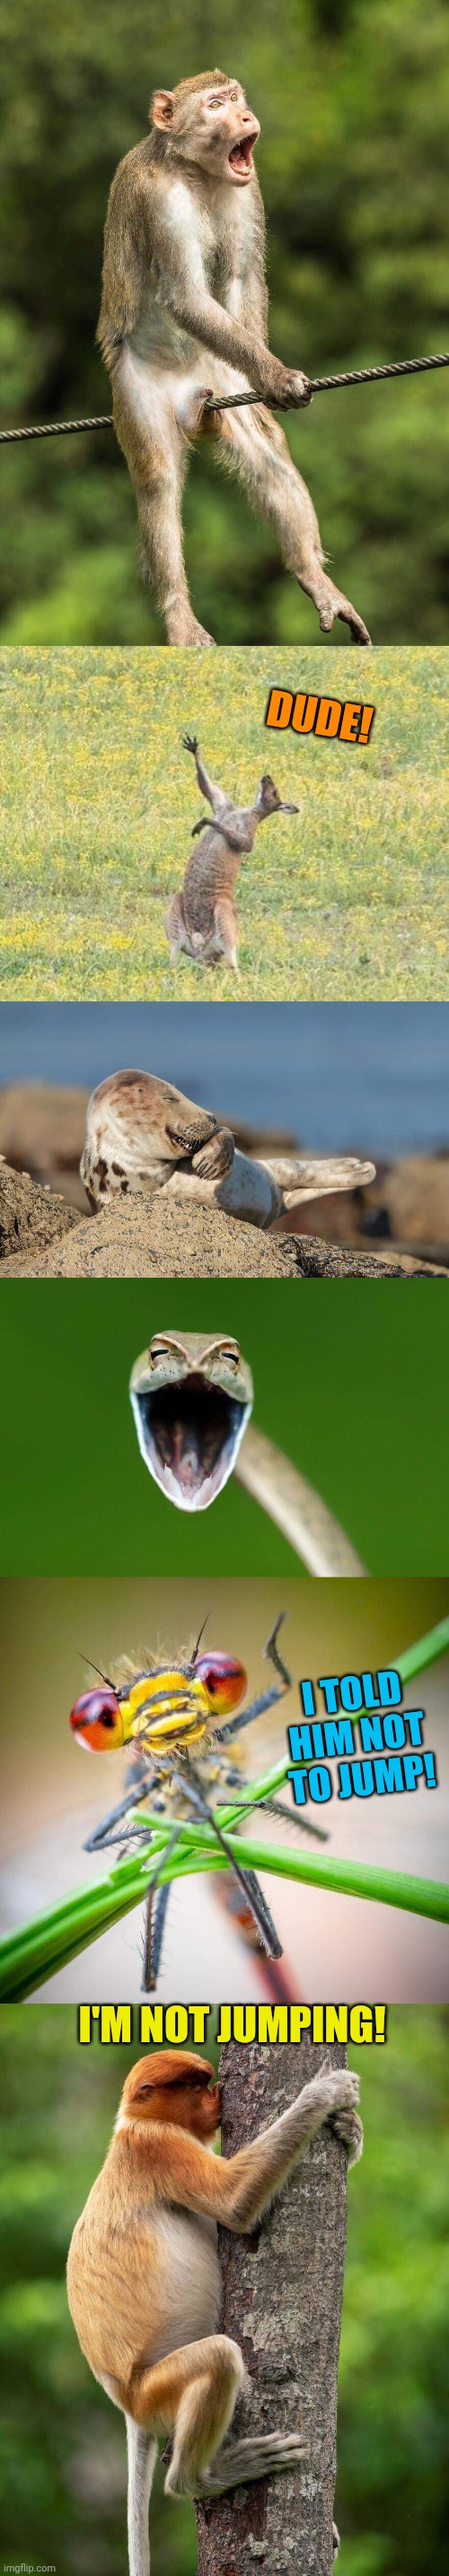 Silly Monkey |  DUDE! I TOLD HIM NOT TO JUMP! I'M NOT JUMPING! | image tagged in monkeys,kangaroo,seal,snake,insect,funny animals | made w/ Imgflip meme maker